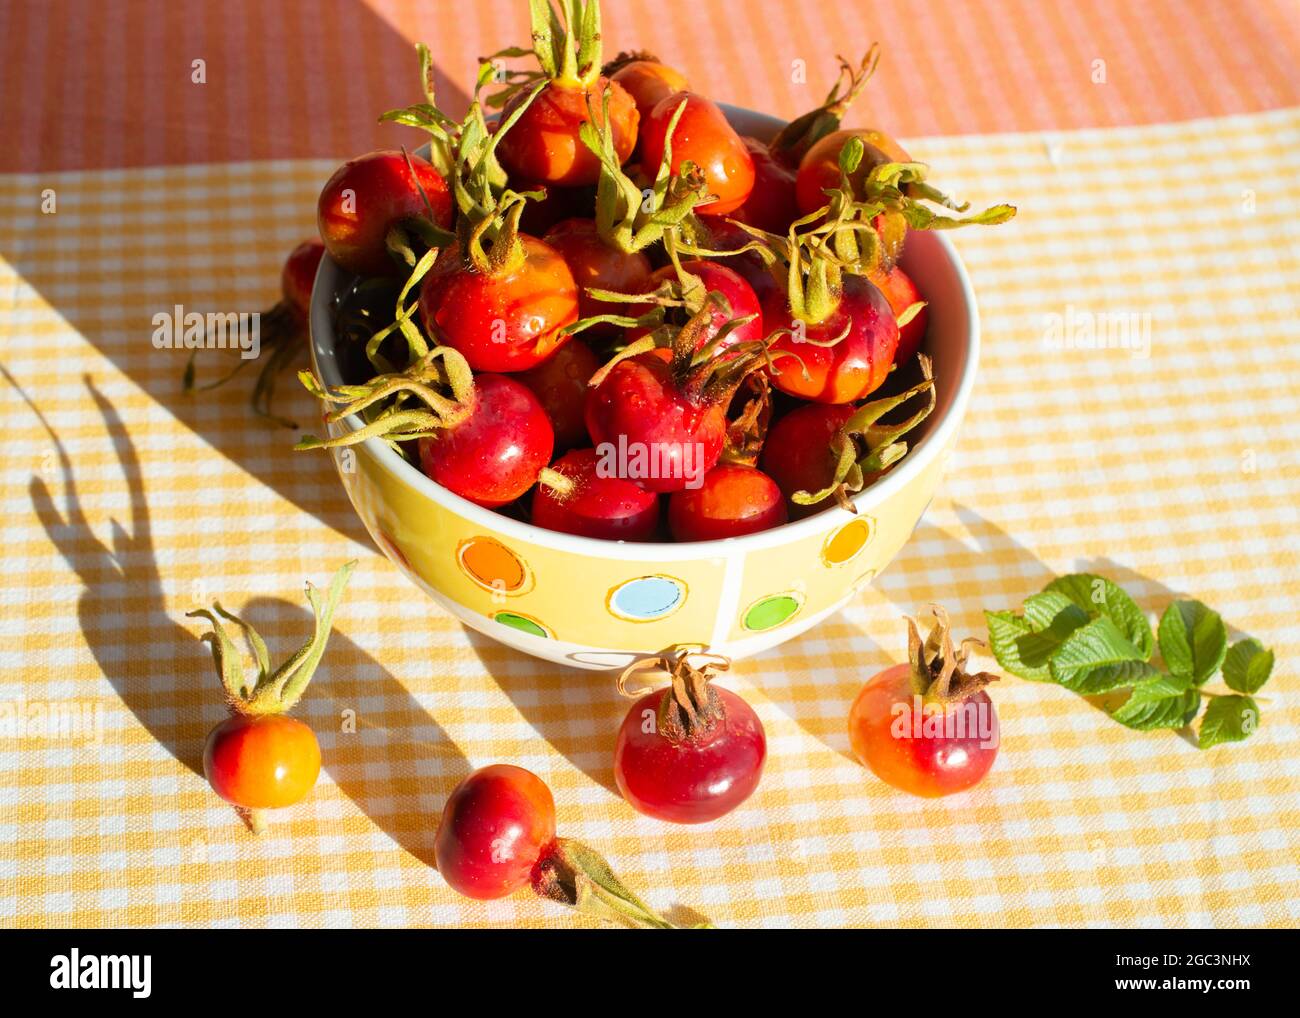 Fruits wild Rose hips of Beach Rose (Rosa rugosa) in a bowl. Table with checkered tablecloths. Harsh shadows. Stock Photo